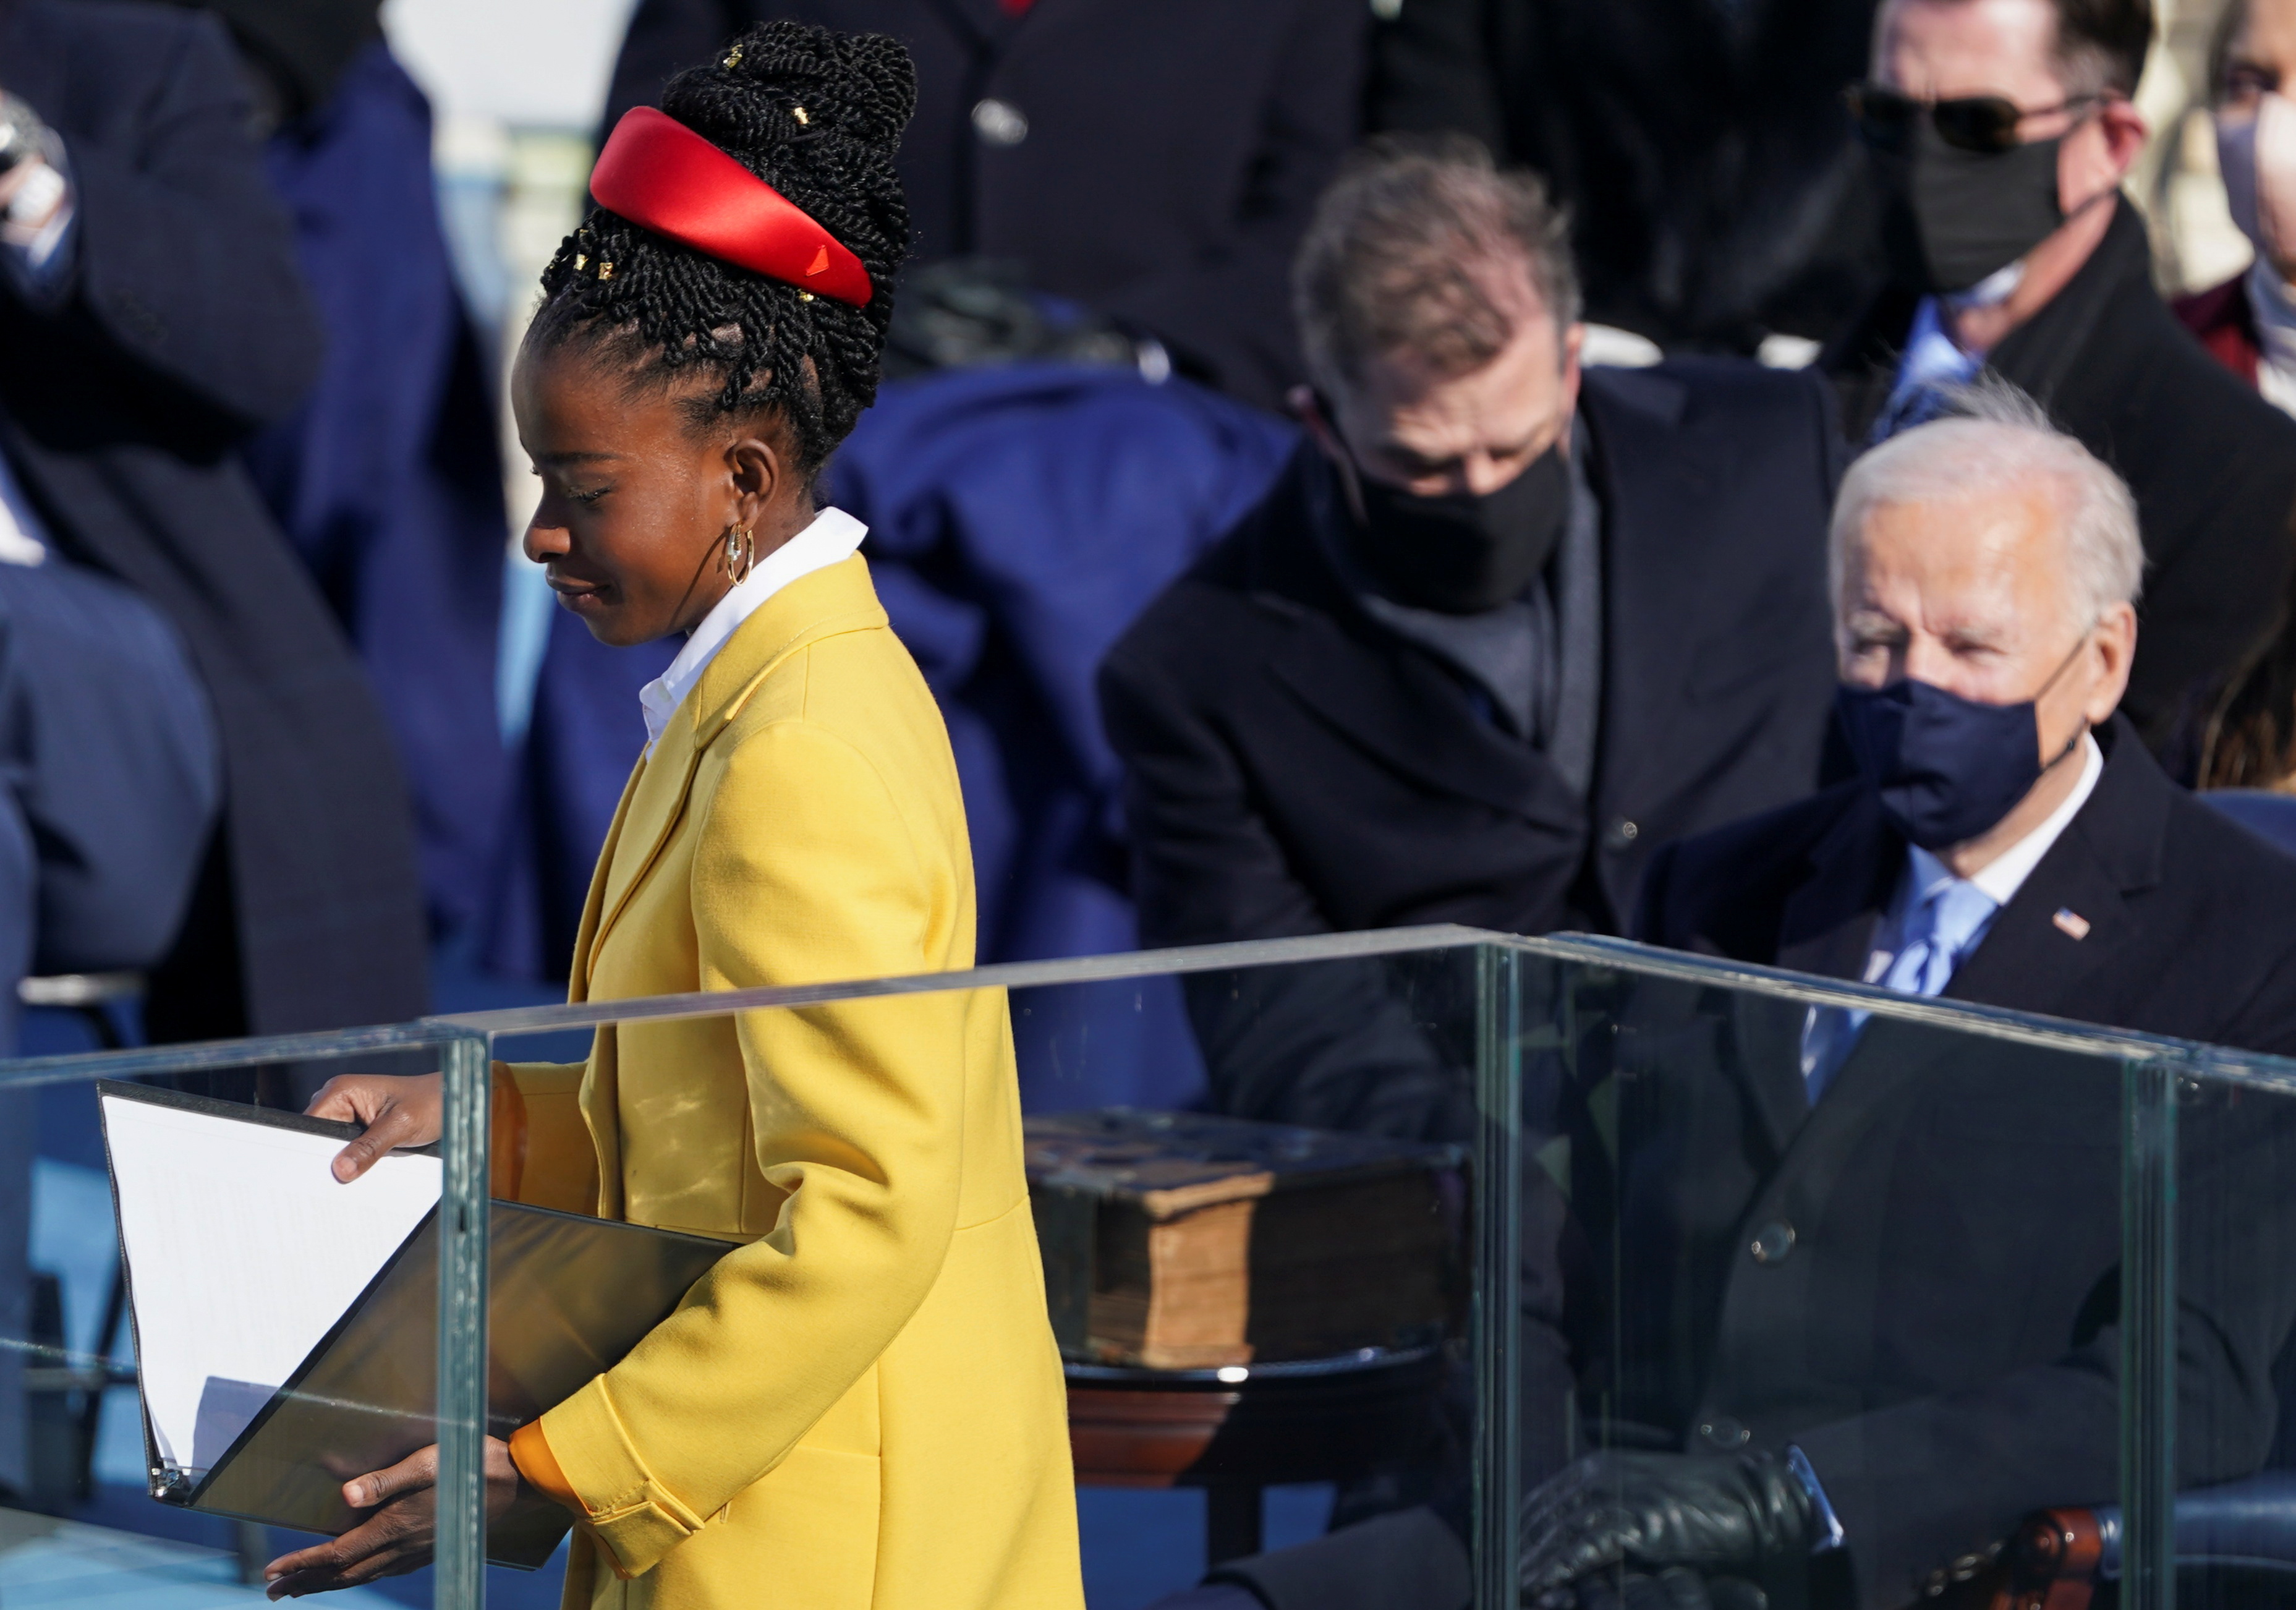 In photos: Trump out, Biden in, on inauguration day in Washington - The ...